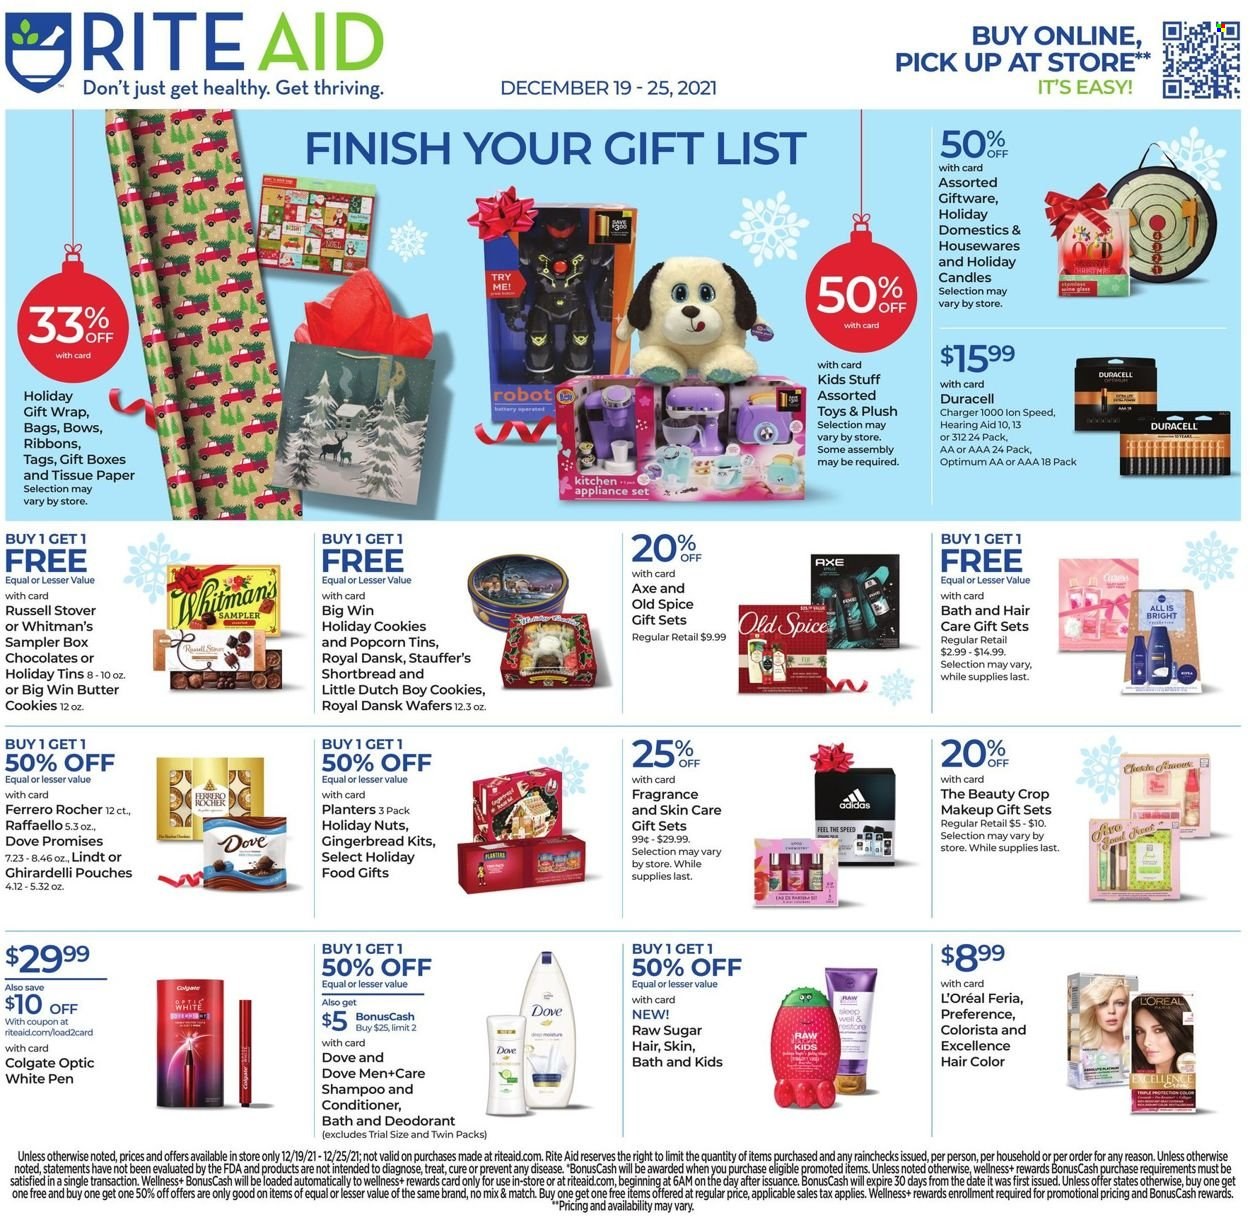 thumbnail - RITE AID Flyer - 12/19/2021 - 12/25/2021 - Sales products - Adidas, cookies, gingerbread, wafers, chocolate, butter cookies, Lindt, Ferrero Rocher, Raffaello, Ghirardelli, popcorn, spice, Planters, Dove, toilet paper, tissues, shampoo, Old Spice, Raw Sugar, Colgate, L’Oréal, conditioner, hair color, Brite, anti-perspirant, fragrance, deodorant, bag, makeup, candle, battery charger, Duracell, Optimum. Page 1.